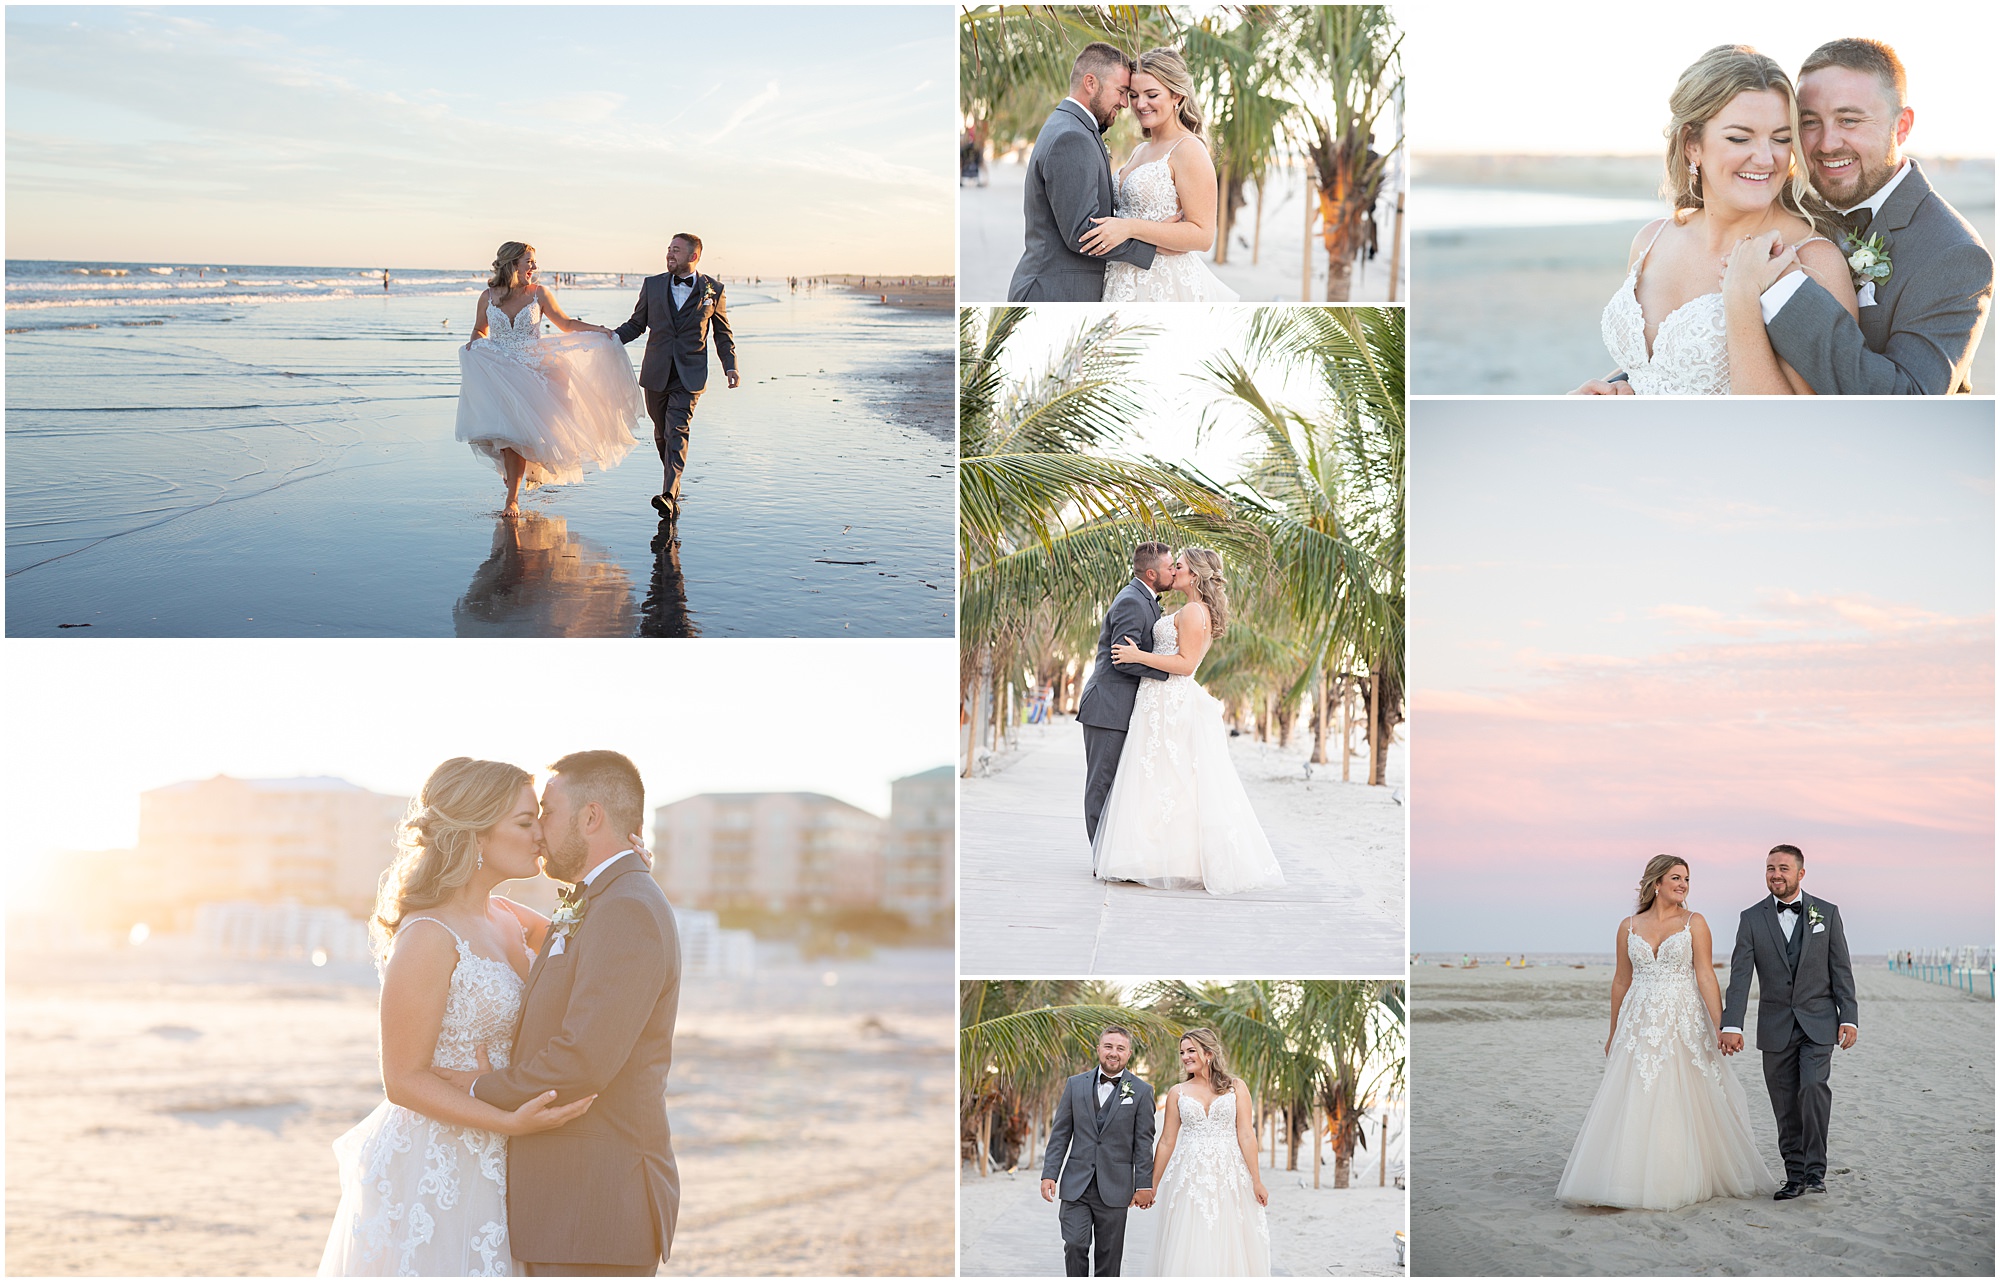 Golden Hour portraits at ICONA Diamond Beach makes it one of the best Jersey Shore wedding venues!